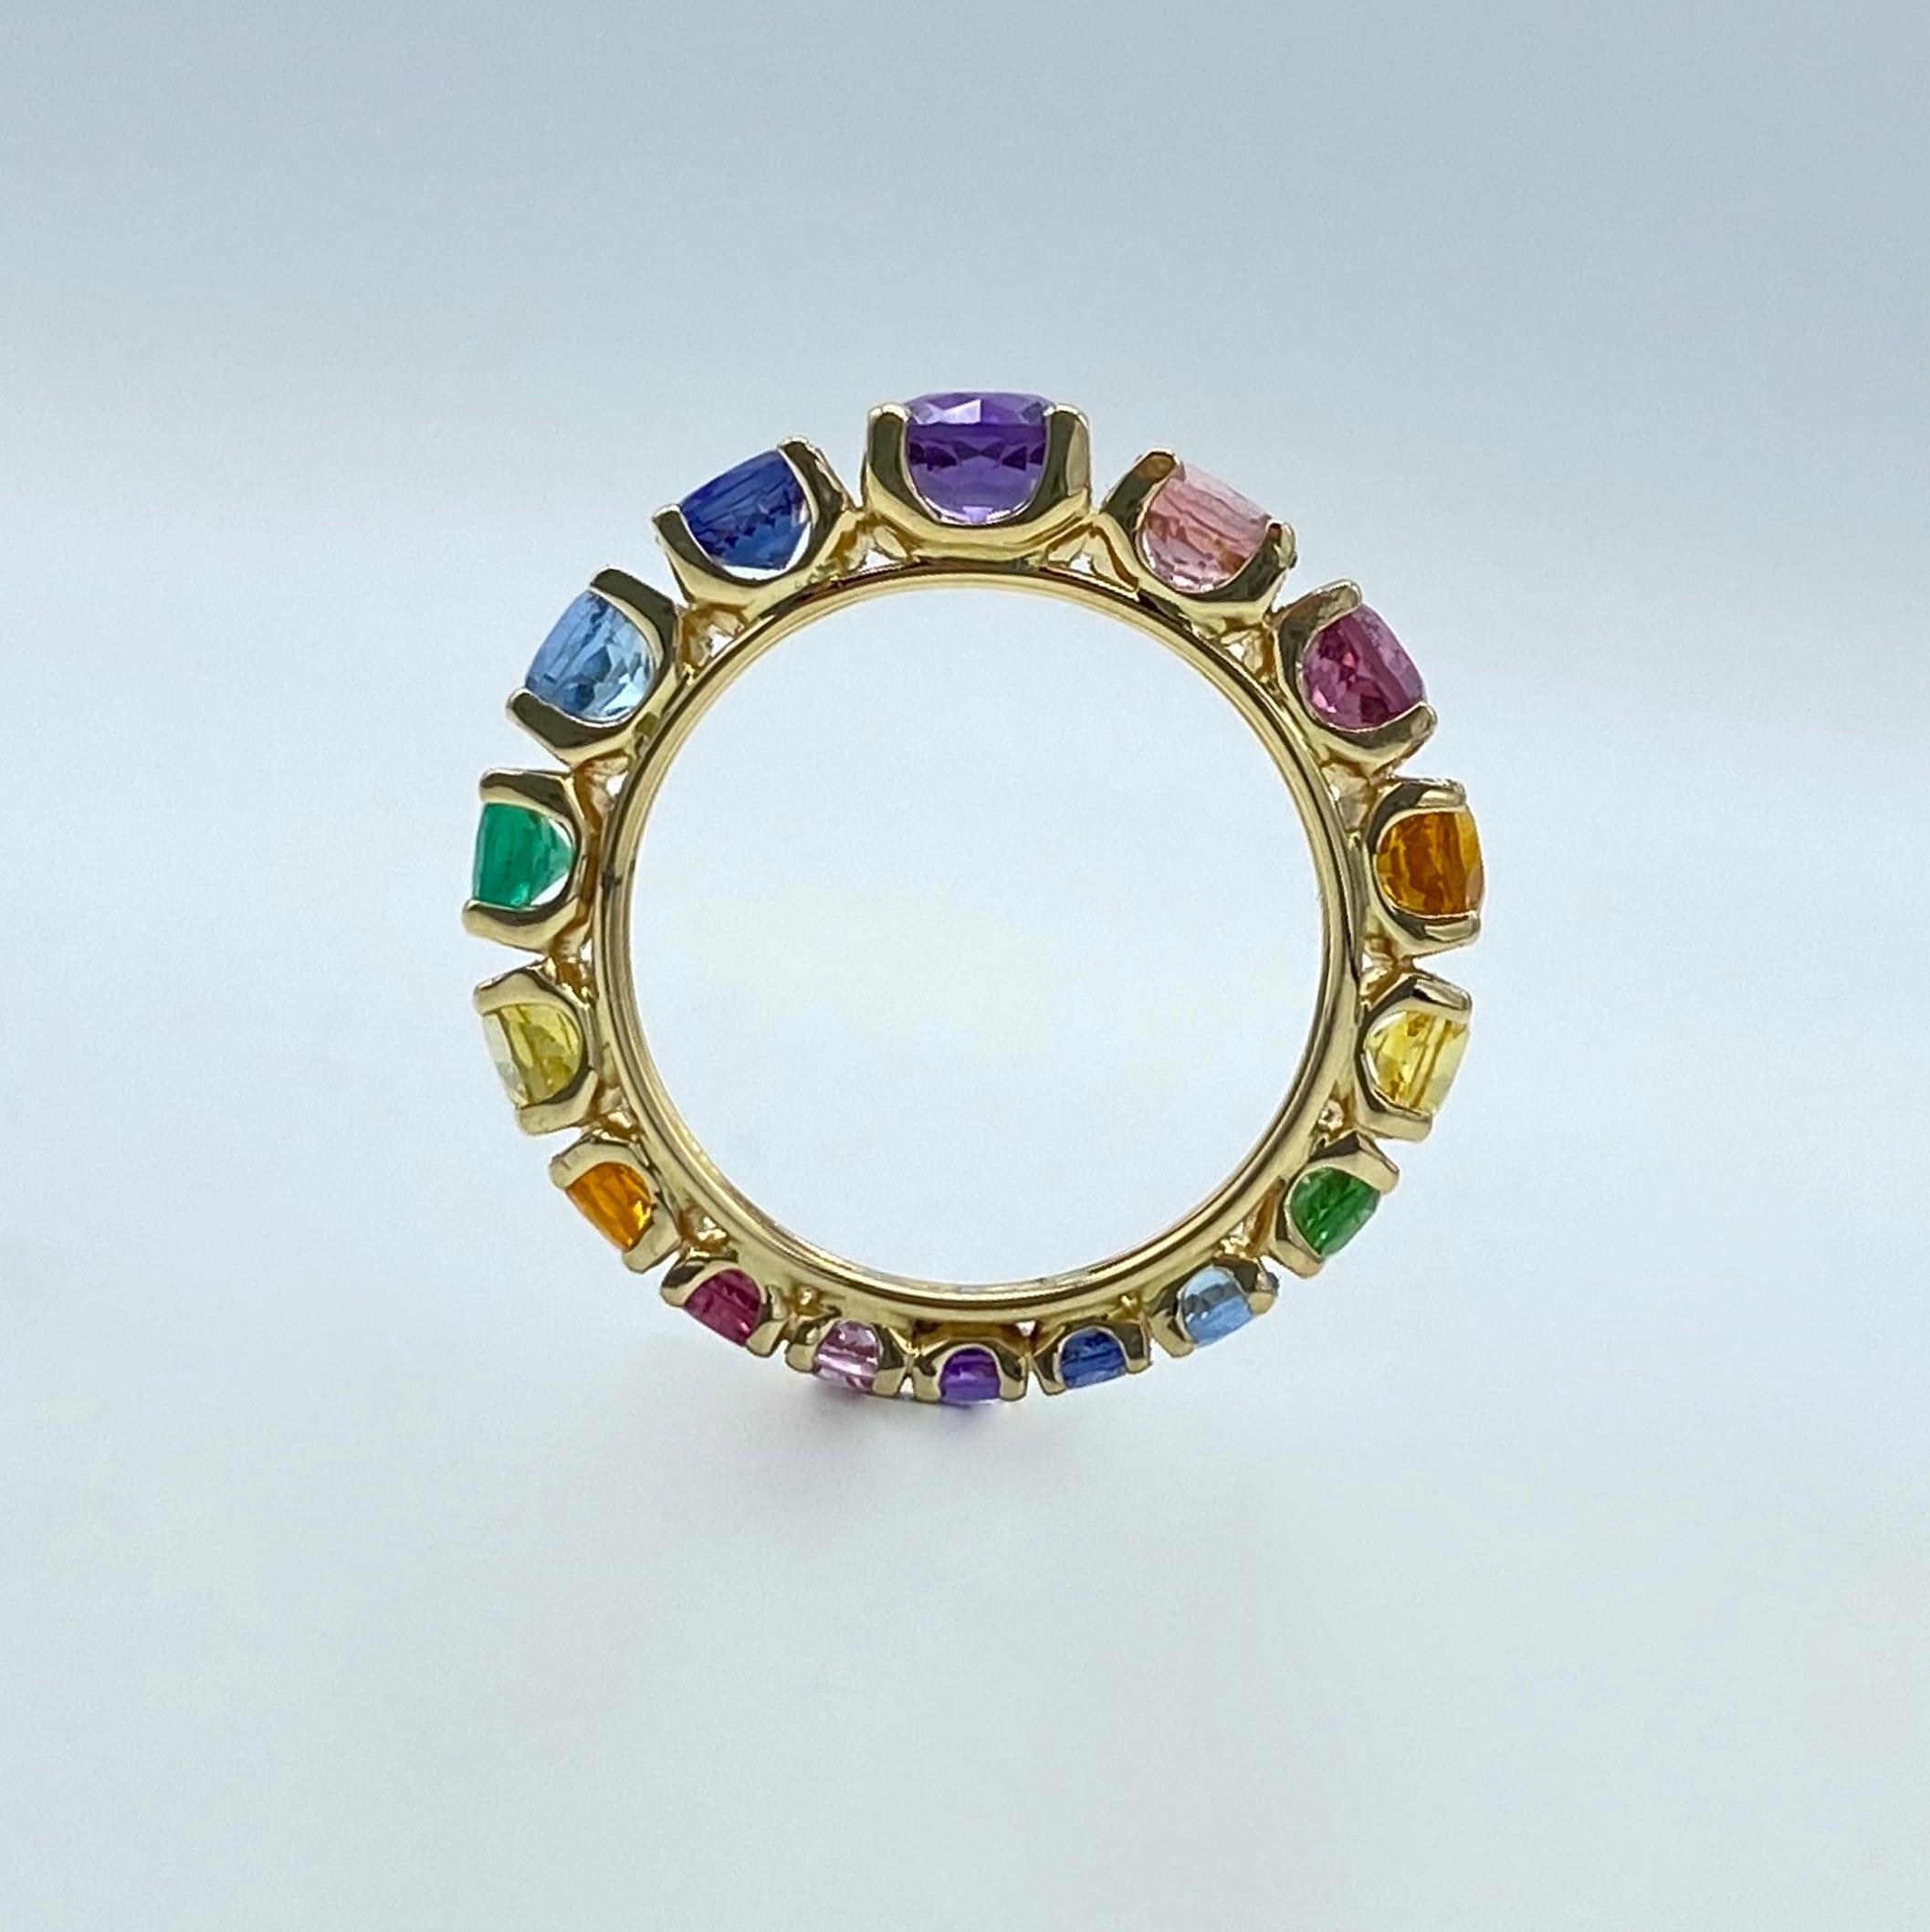 Eternity Band Rainbow Ring Sapphire Emerald Tsavorite Semiprecious 18Kt Gold Made in Italy
This multicolor eternity ring with scaled stones, is set from 16 stones. It has the biggest stone on the top is an amethyst, then there are: blue sapphire,